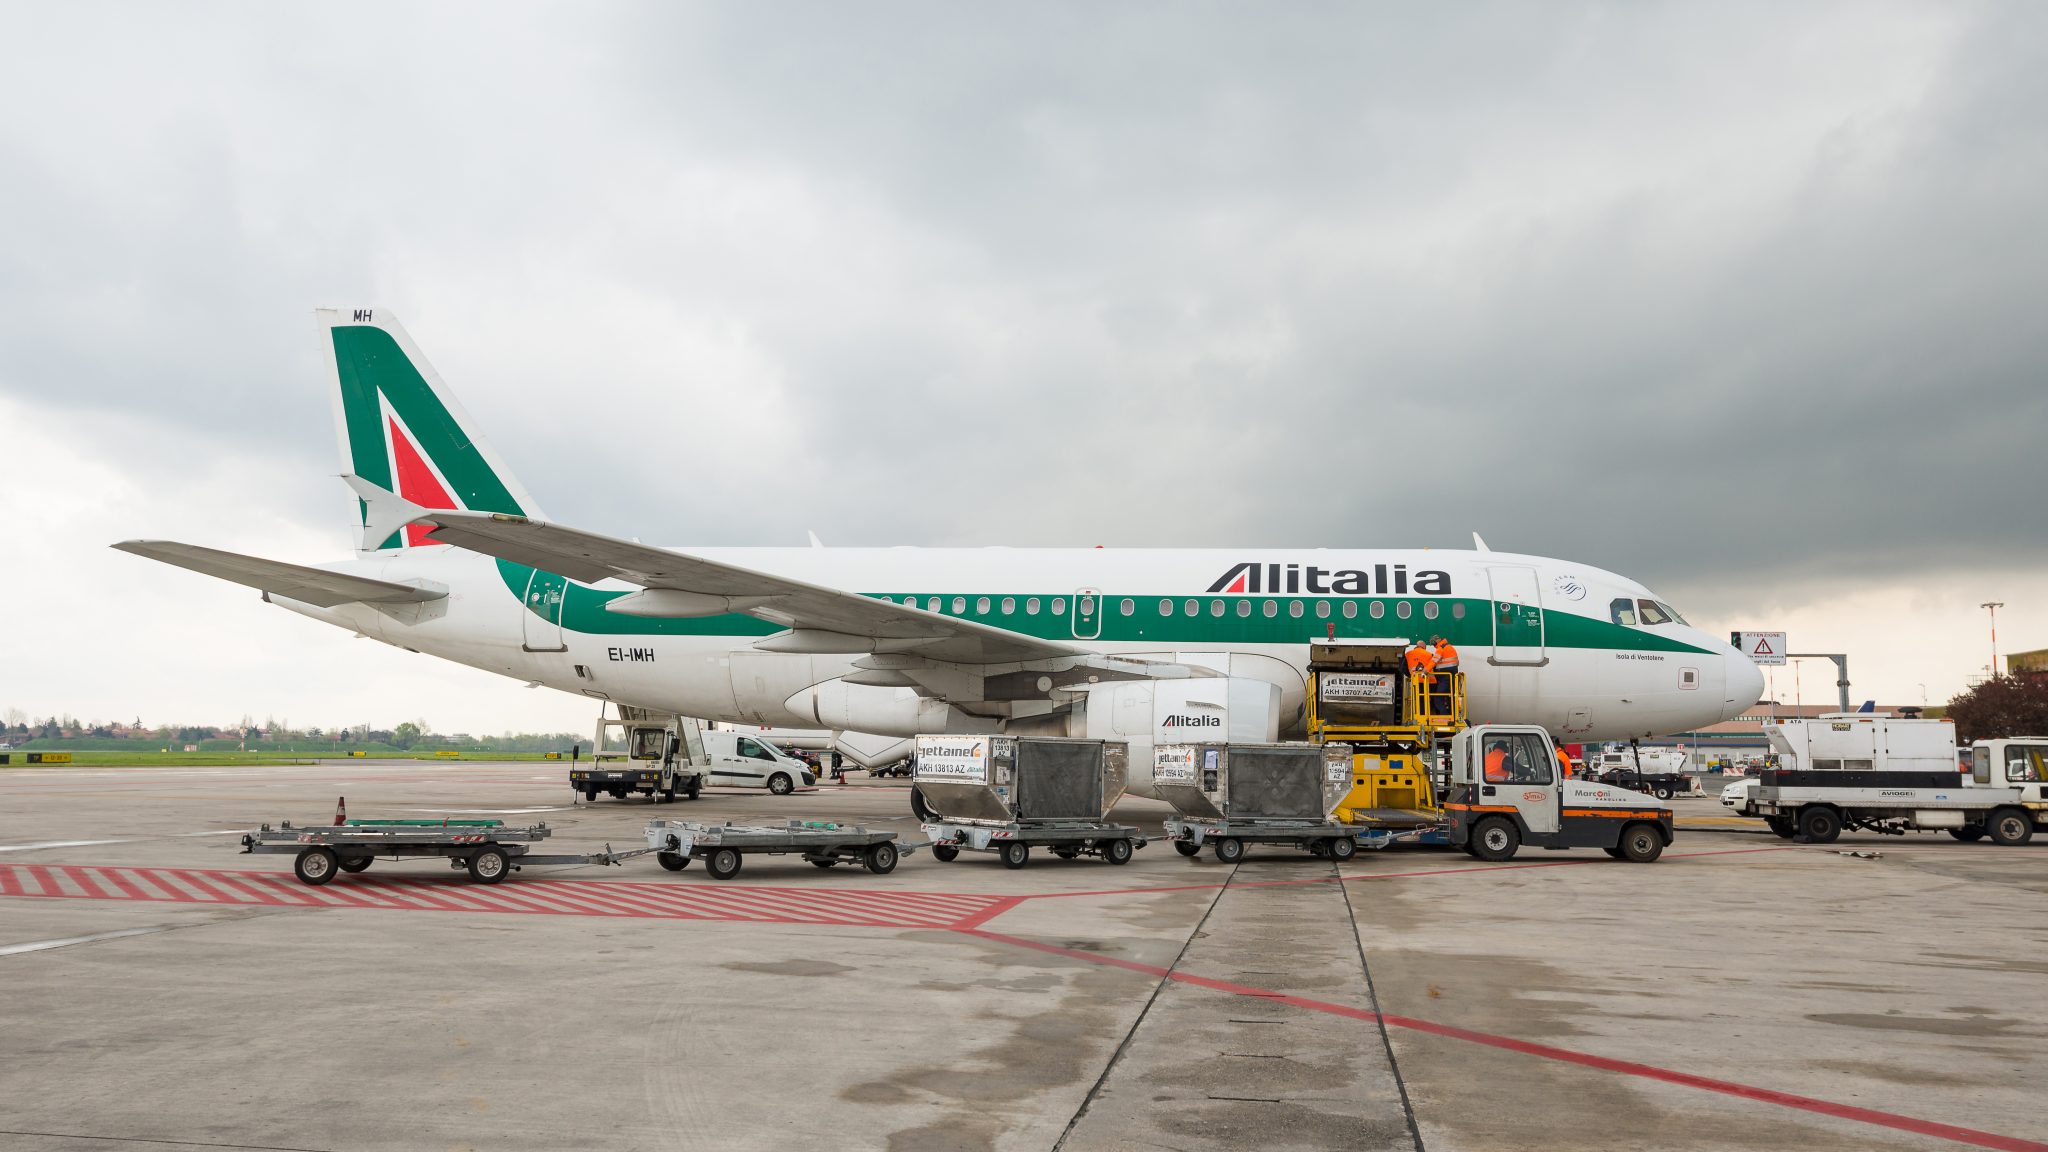 Alitalia’s questionable move to “Newco” will only work if all staff are laid-off; while lessors say think again to MAG